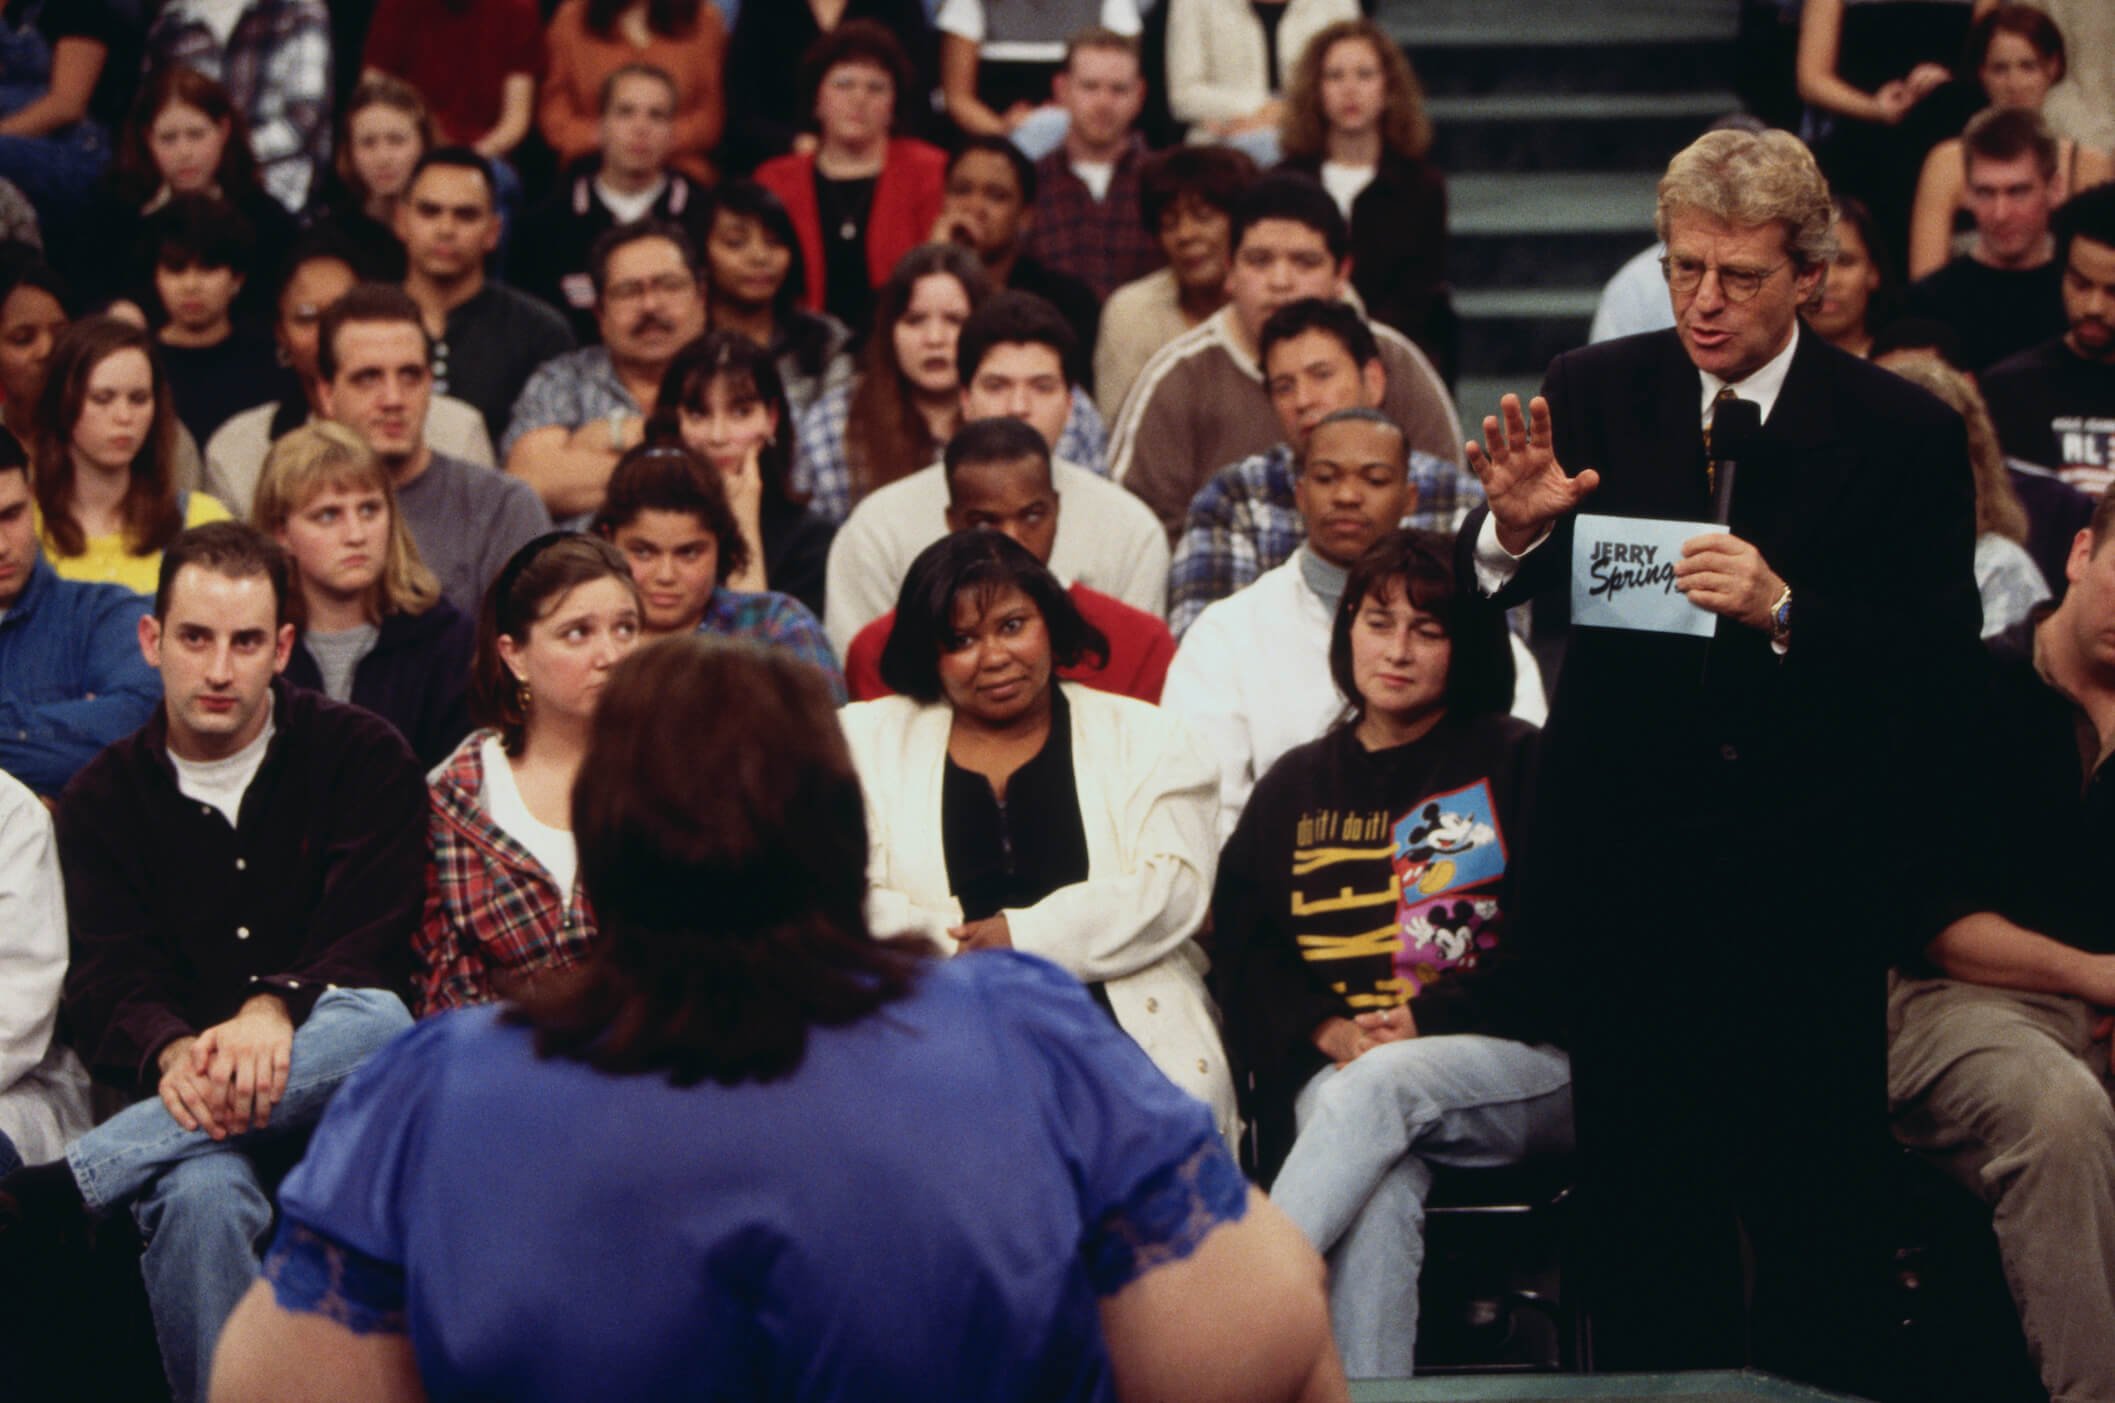 Jerry Springer standing in the audience and talking on 'The Jerry Springer Show'